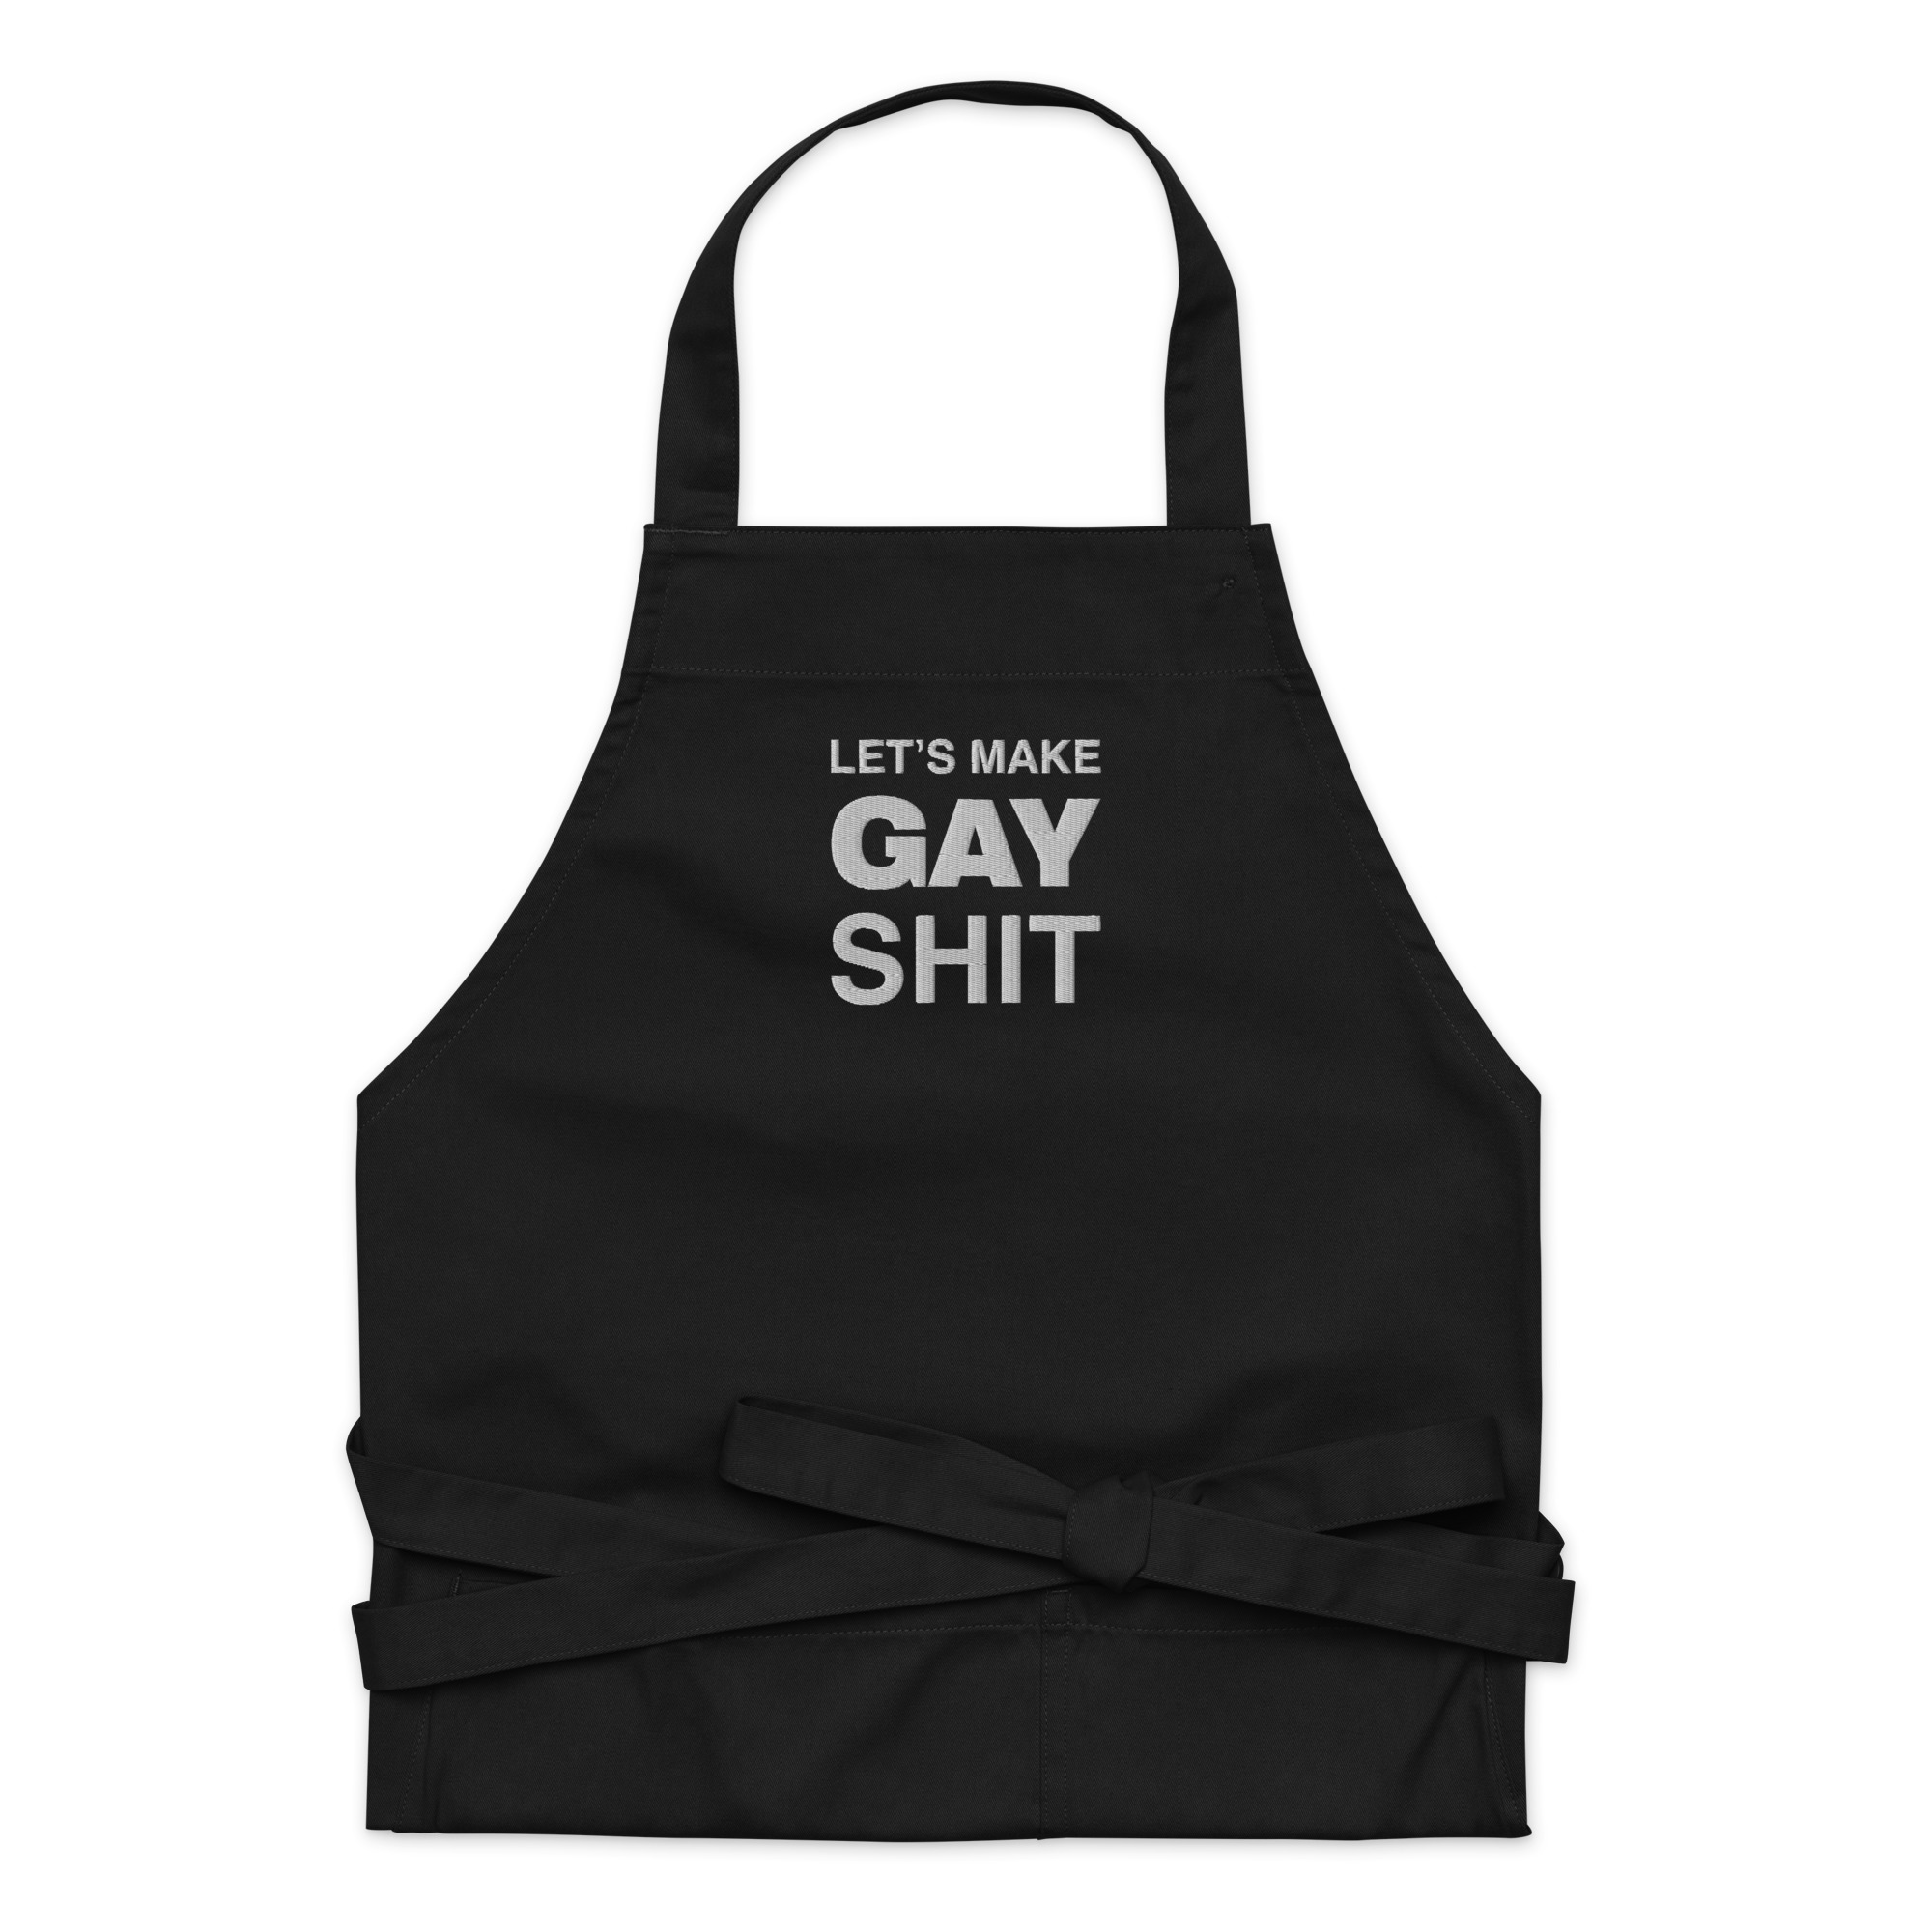 Featured image for “Let’s make Gay Sh!t - Organic cotton apron”